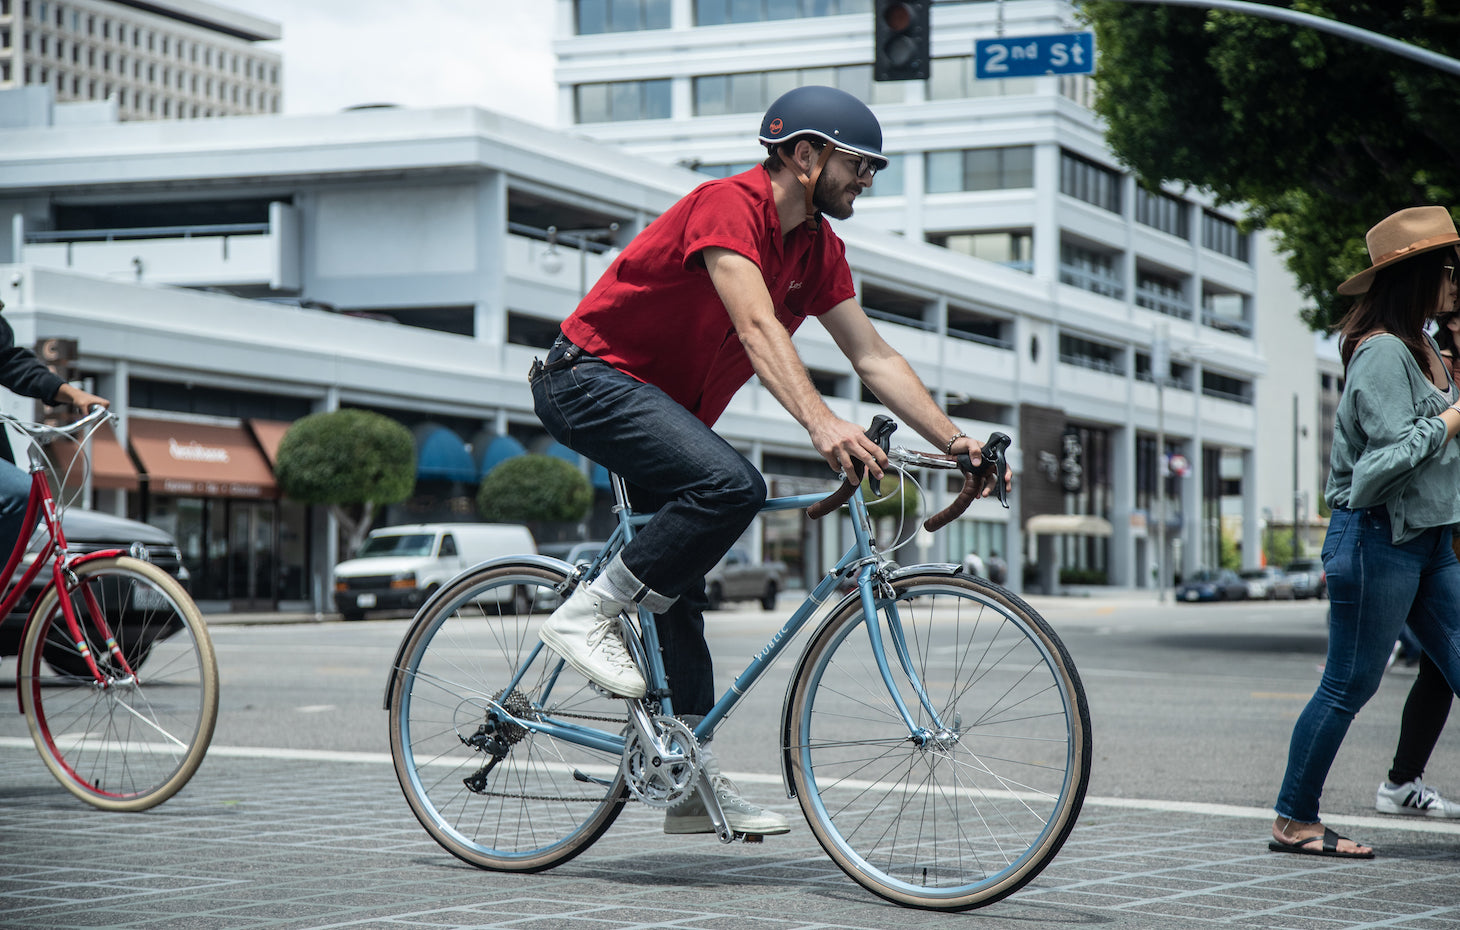 SUMMER CYCLING 101 WITH PUBLIC BIKES